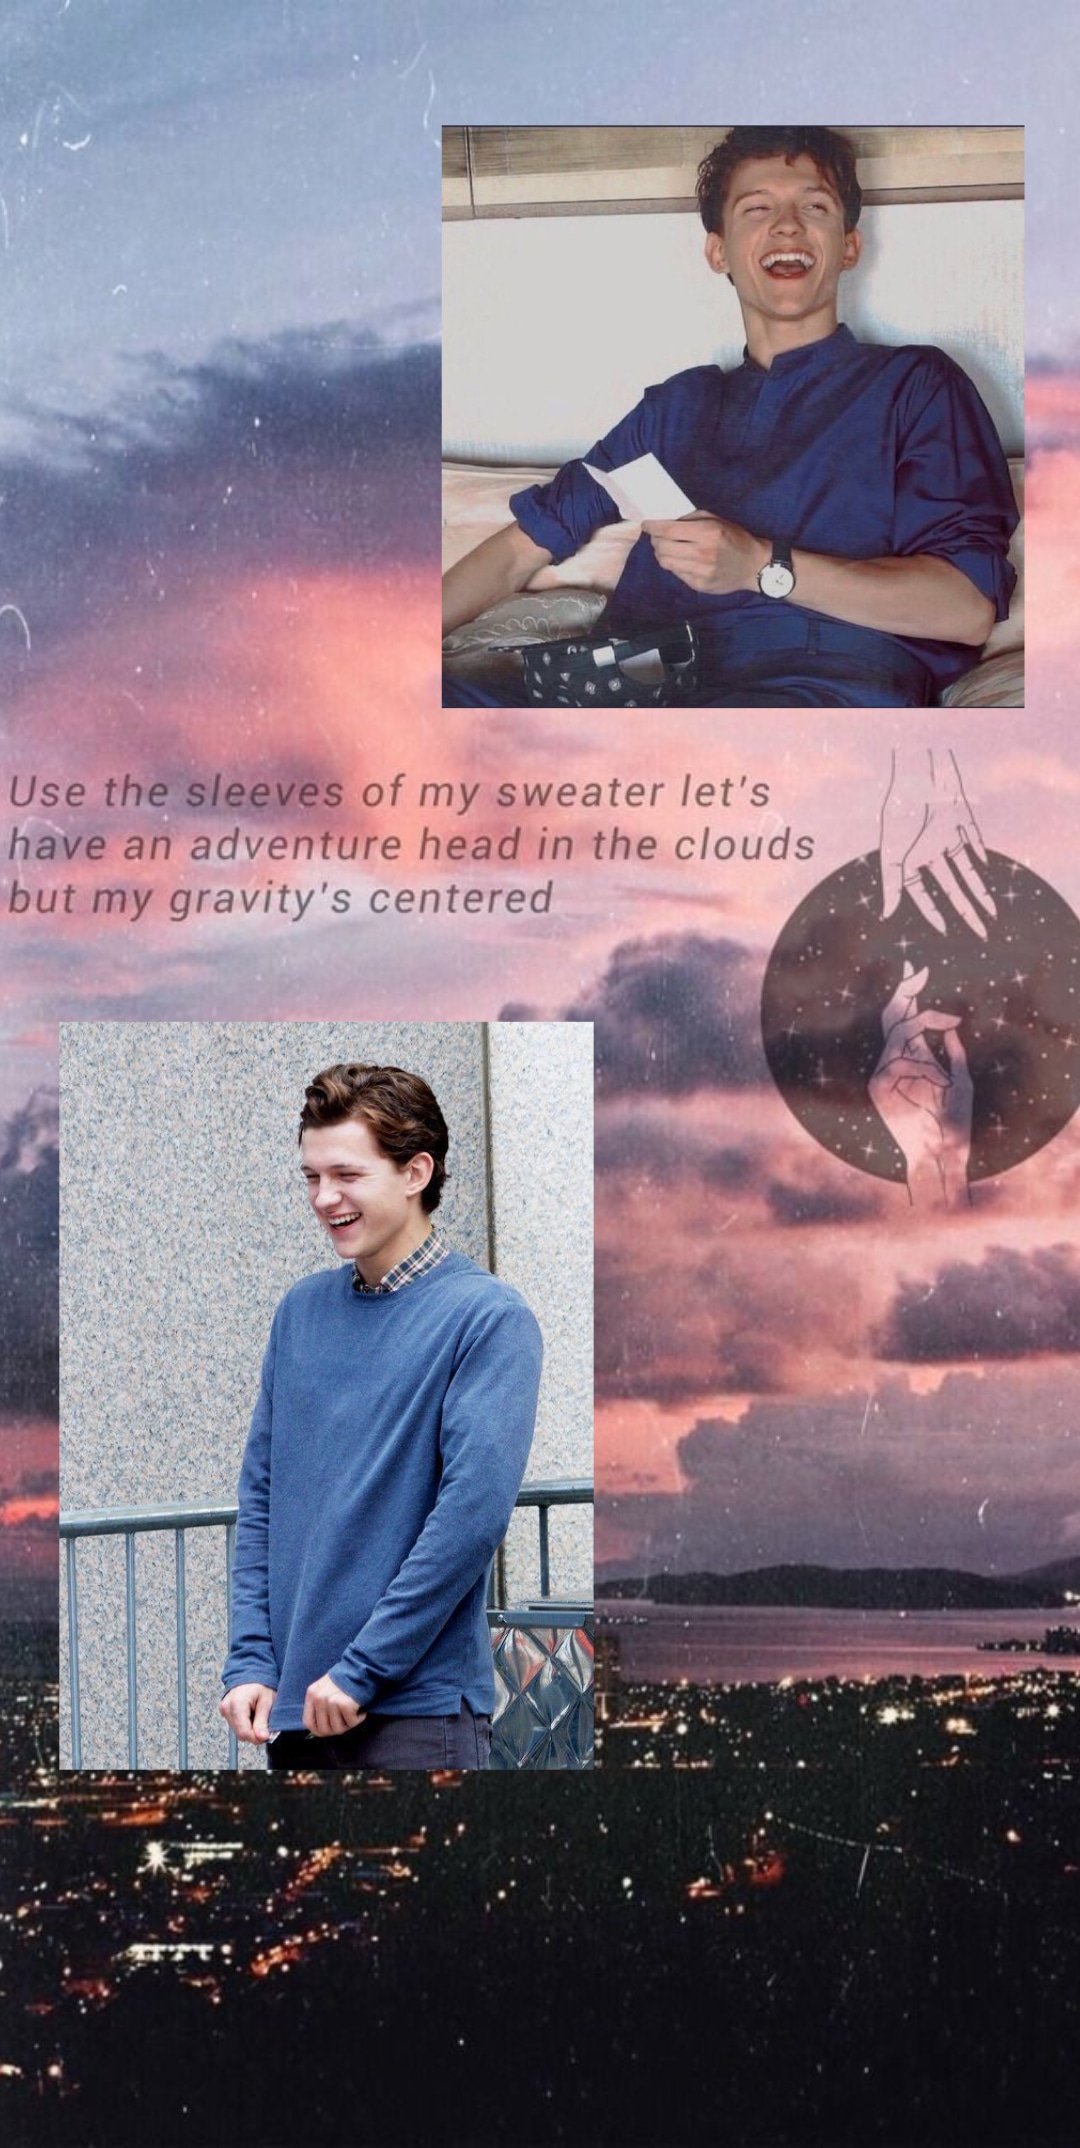 risht one's for all the Hollanders Like and rt if downloaded #wallpaper #aesthetic #aestheticwallpaper #TomHolland #tomhollandwallpaper #sweaterweather #theneighborhood #MARVEL #SpiderMan